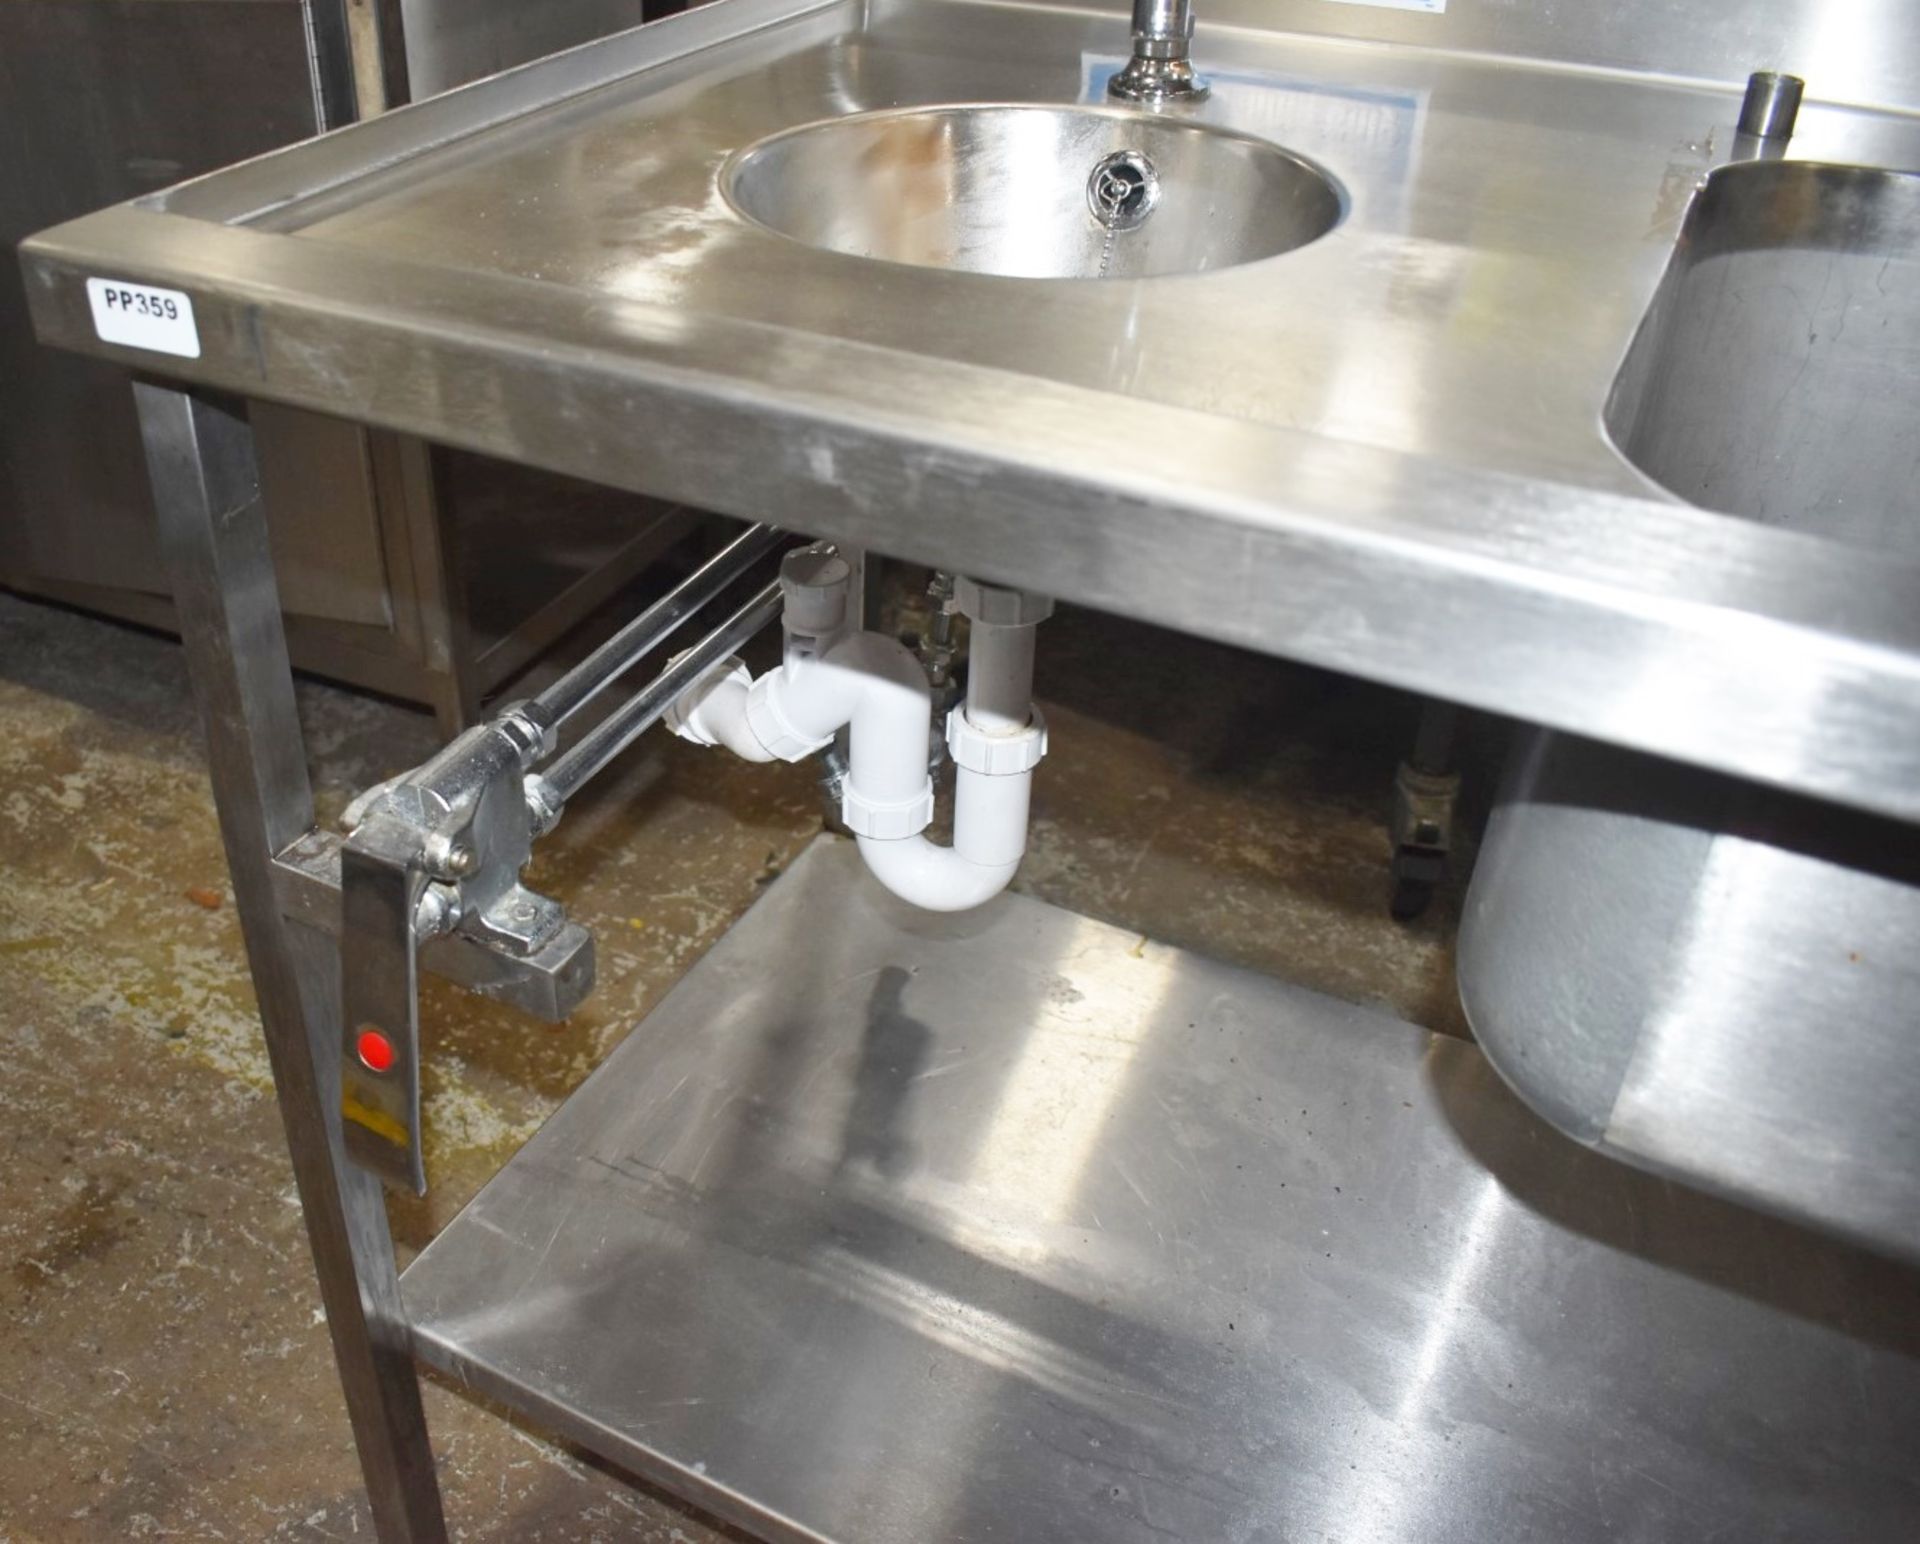 1 x Commercial Kitchen Wash Station With Two Large Sink Bowls, Mixer Taps, Drainer, Handfree Wash - Image 4 of 8